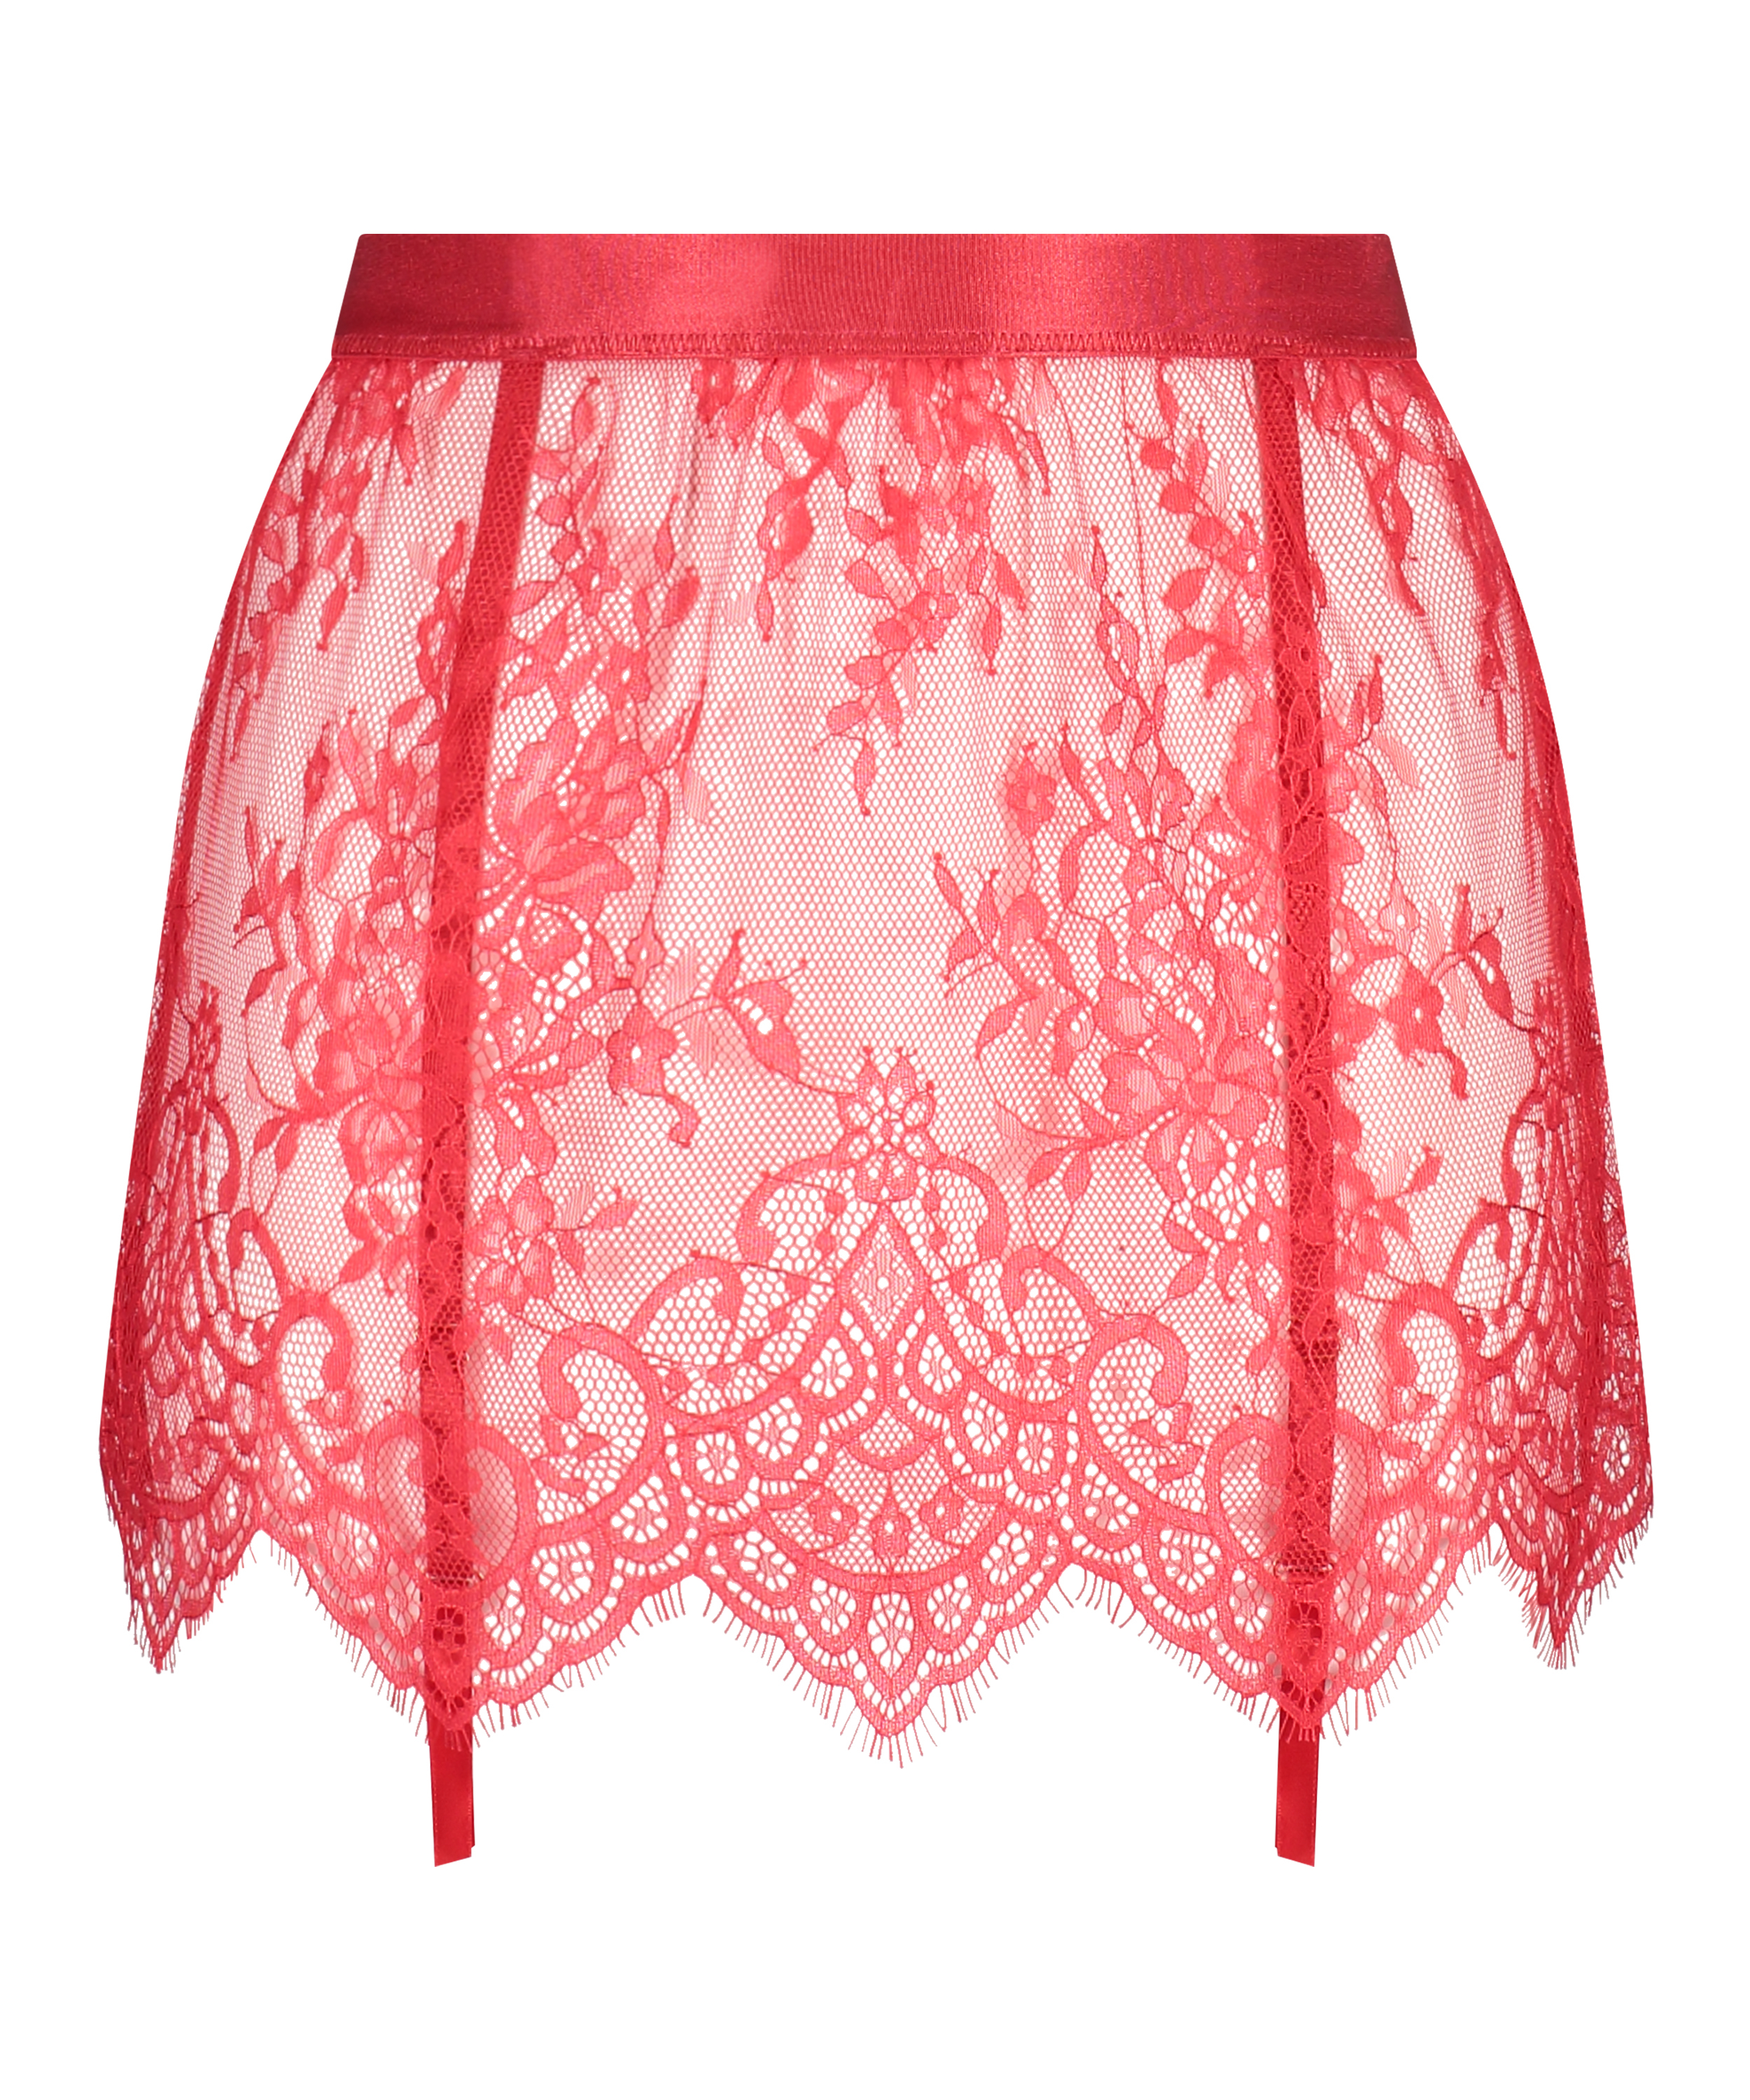 Rok Lace, Rood, main